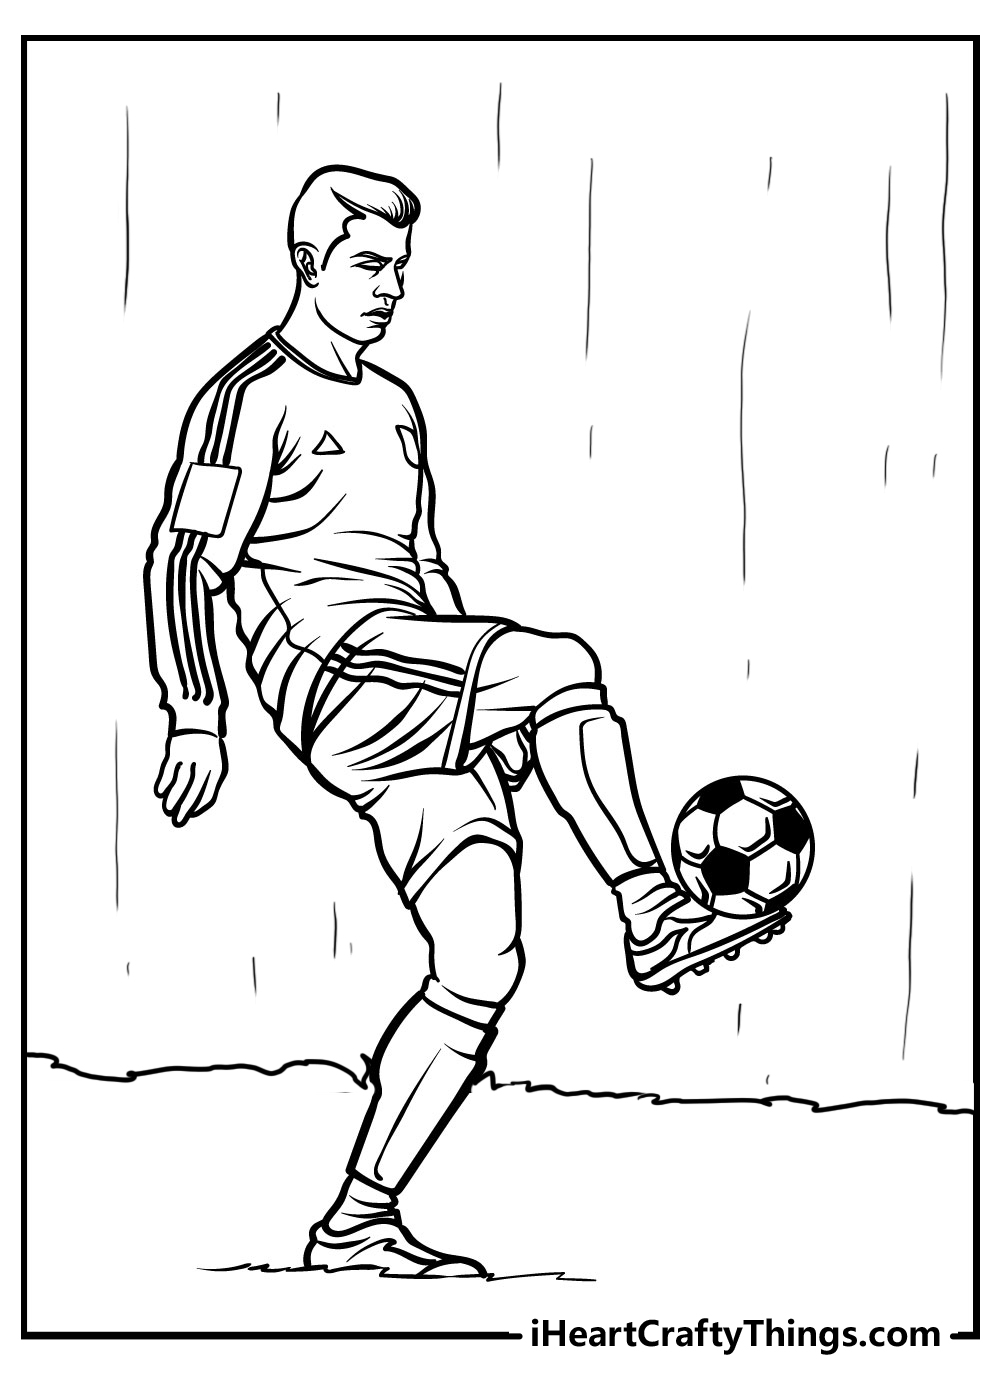 Football Coloring Pages Updated 2021